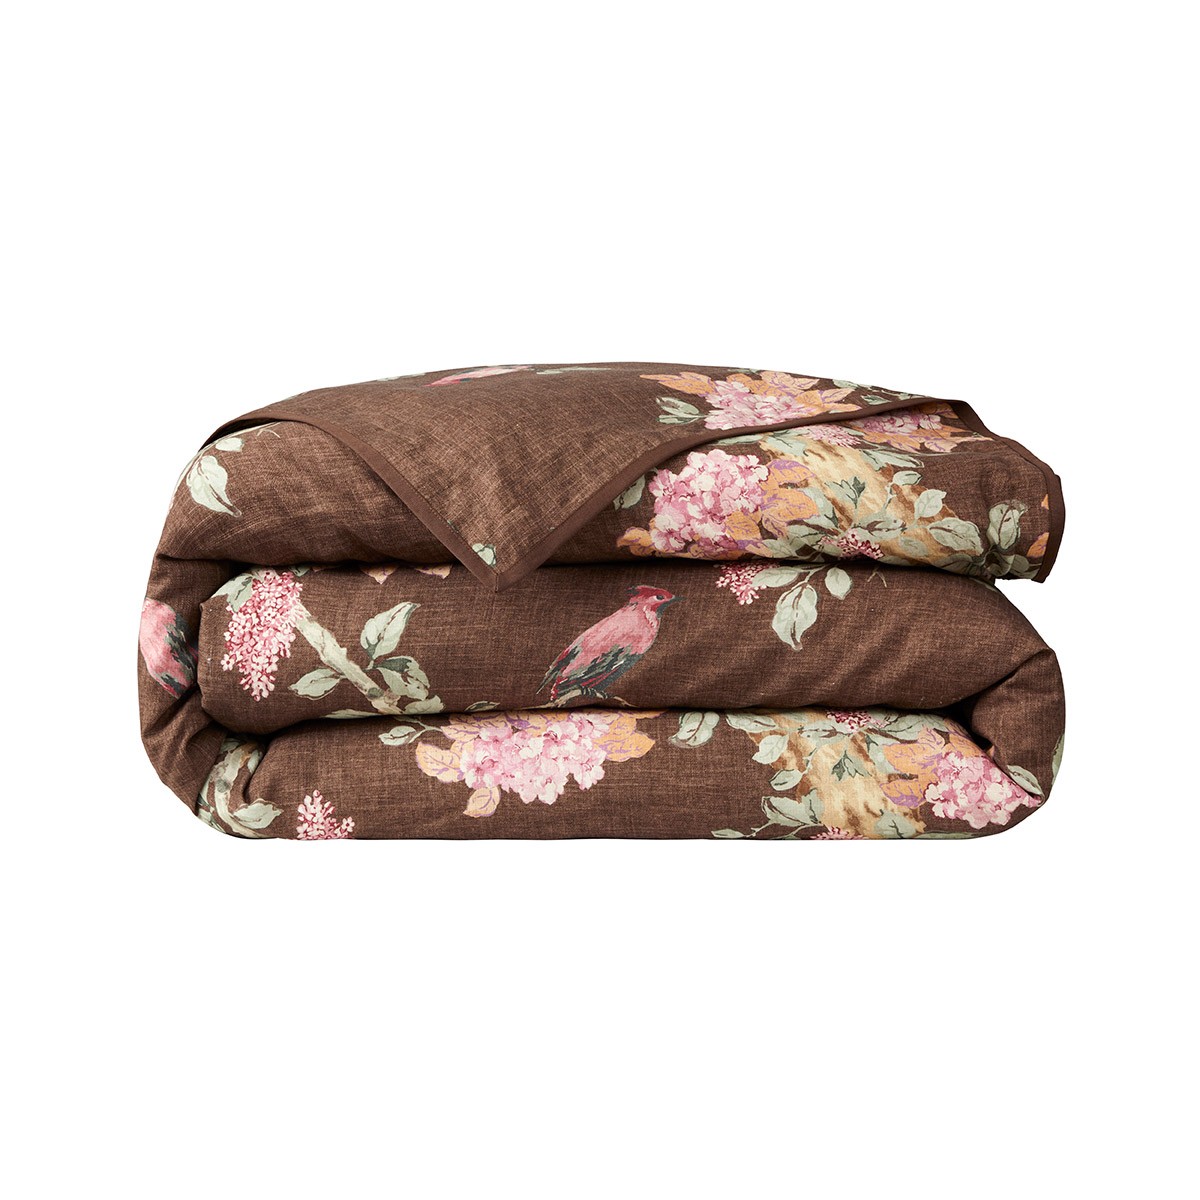 Bed Linen Harlow Brinly Brown